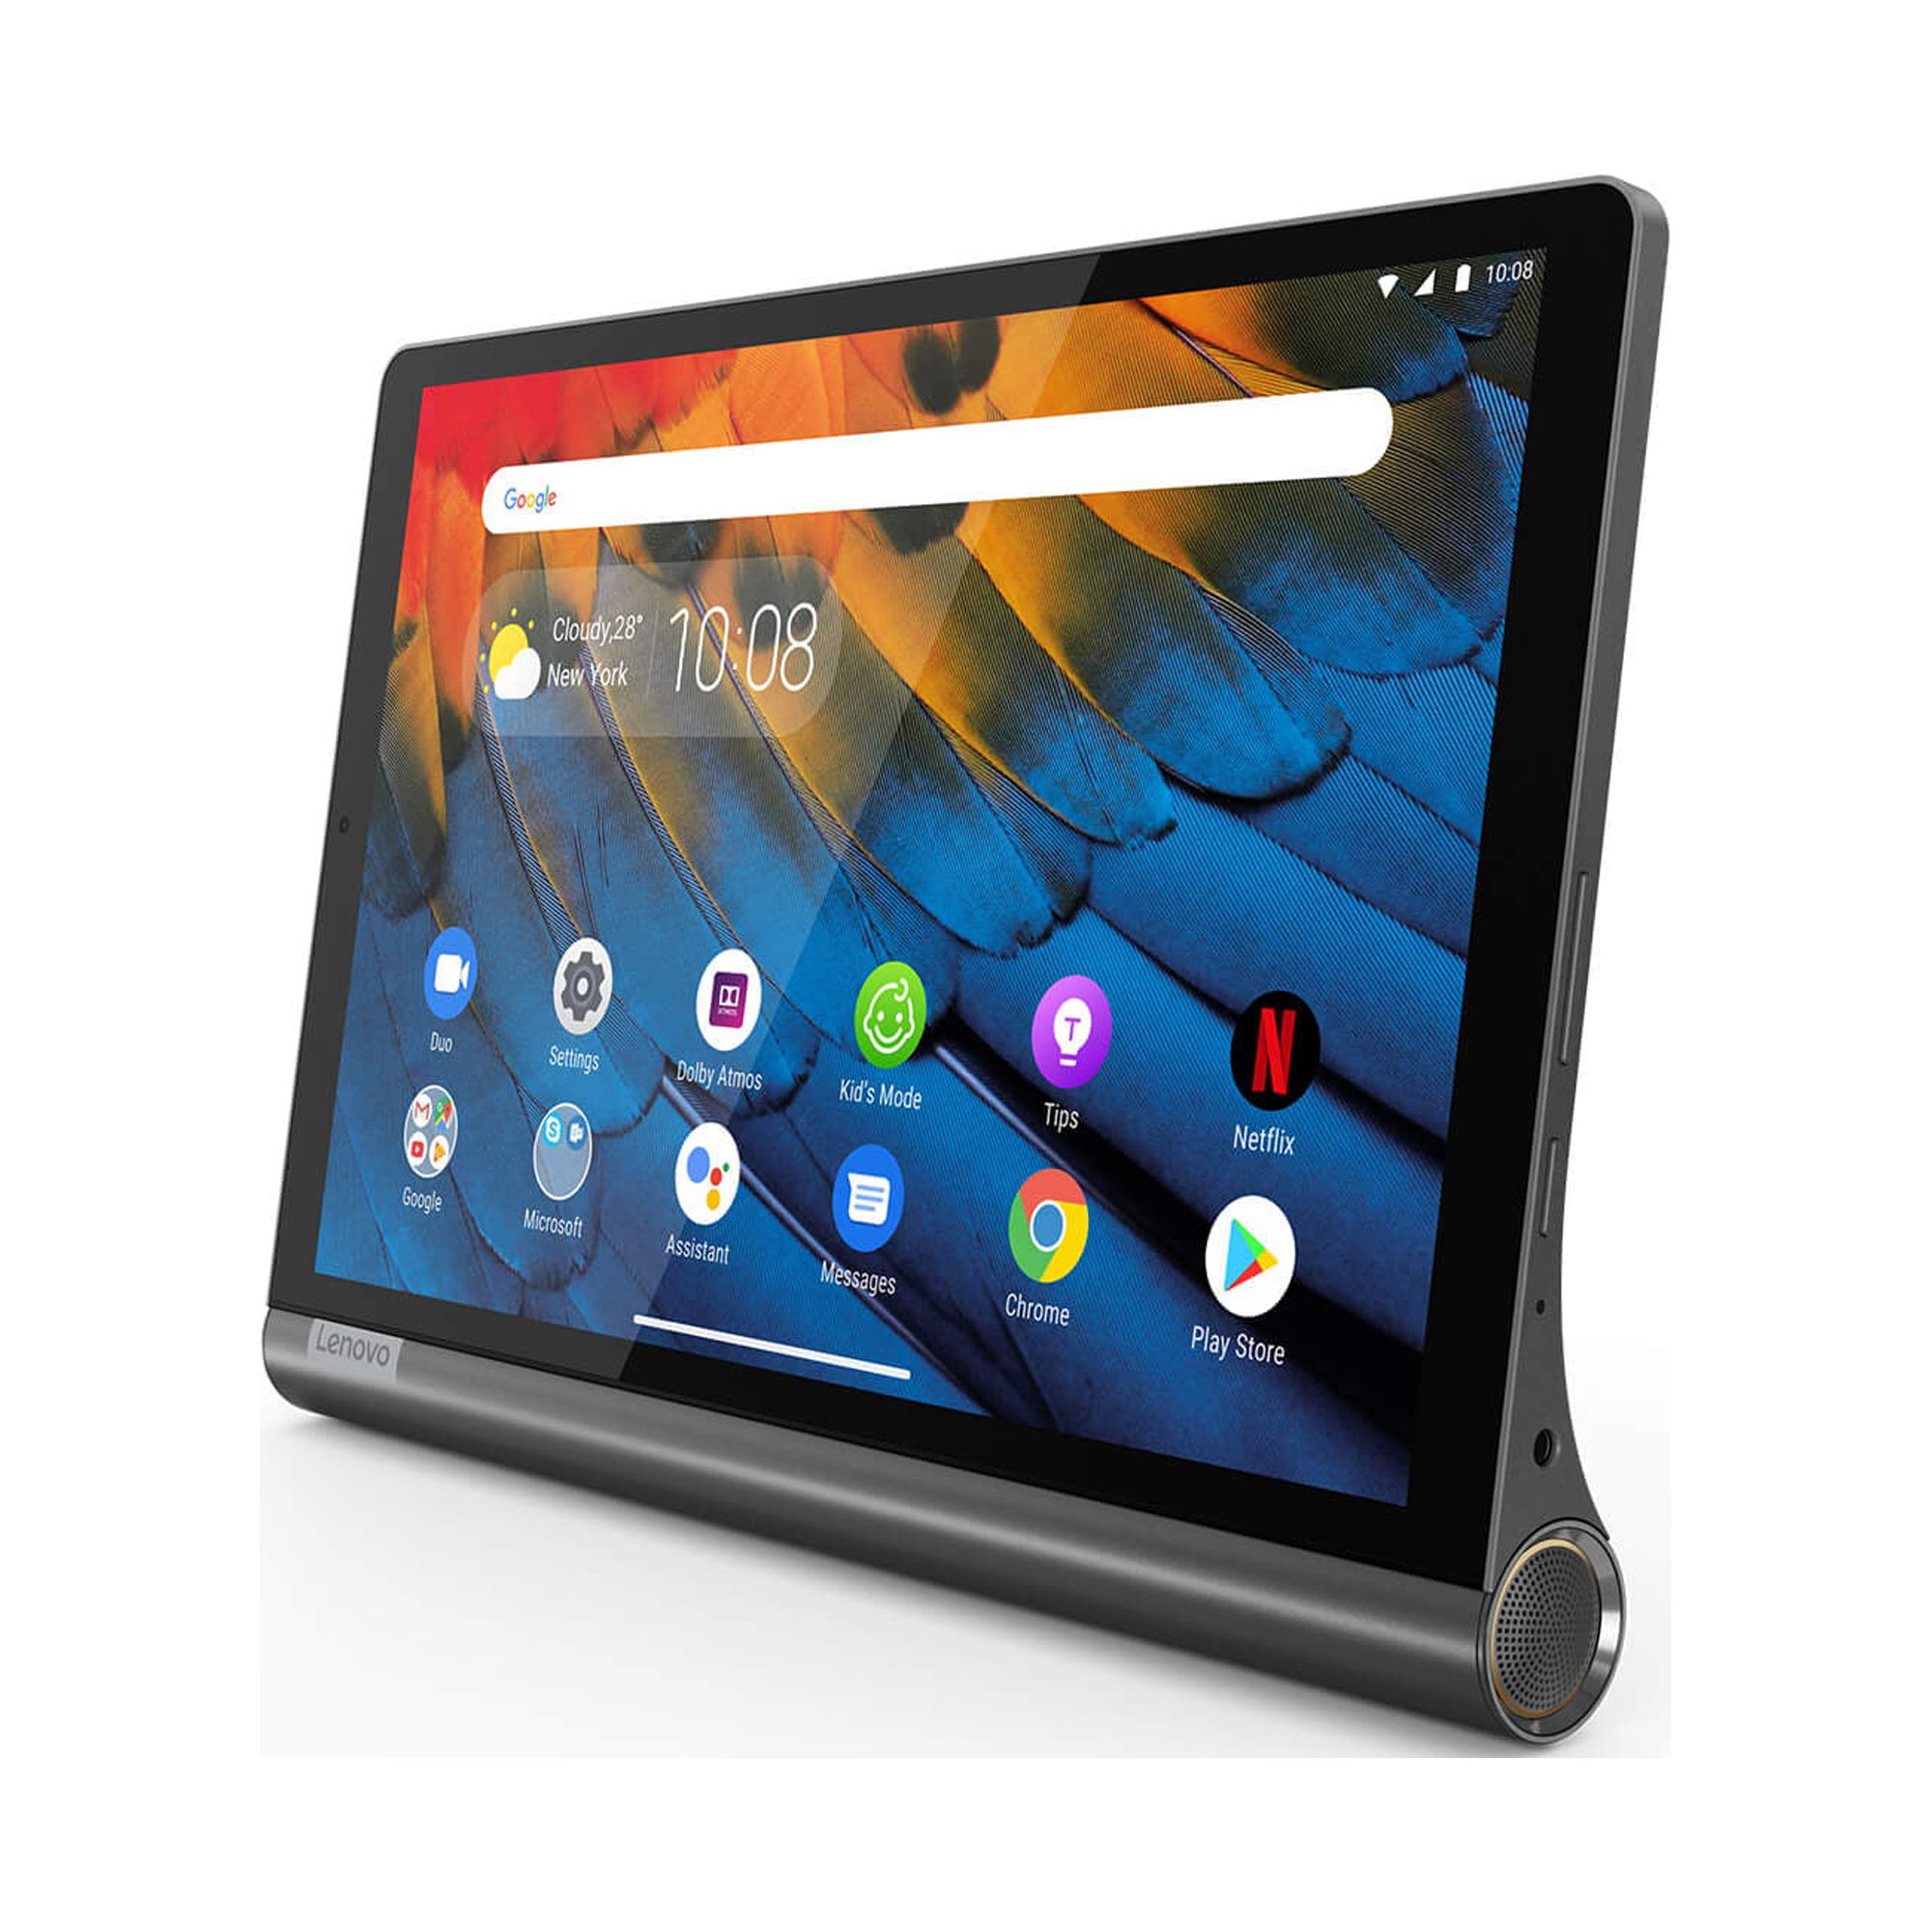 Lenovo Yoga Smart Tab in Gray, 10.1" FHD IPS Touch, 4GB, 64GB eMMC, Android Pie - image 4 of 5